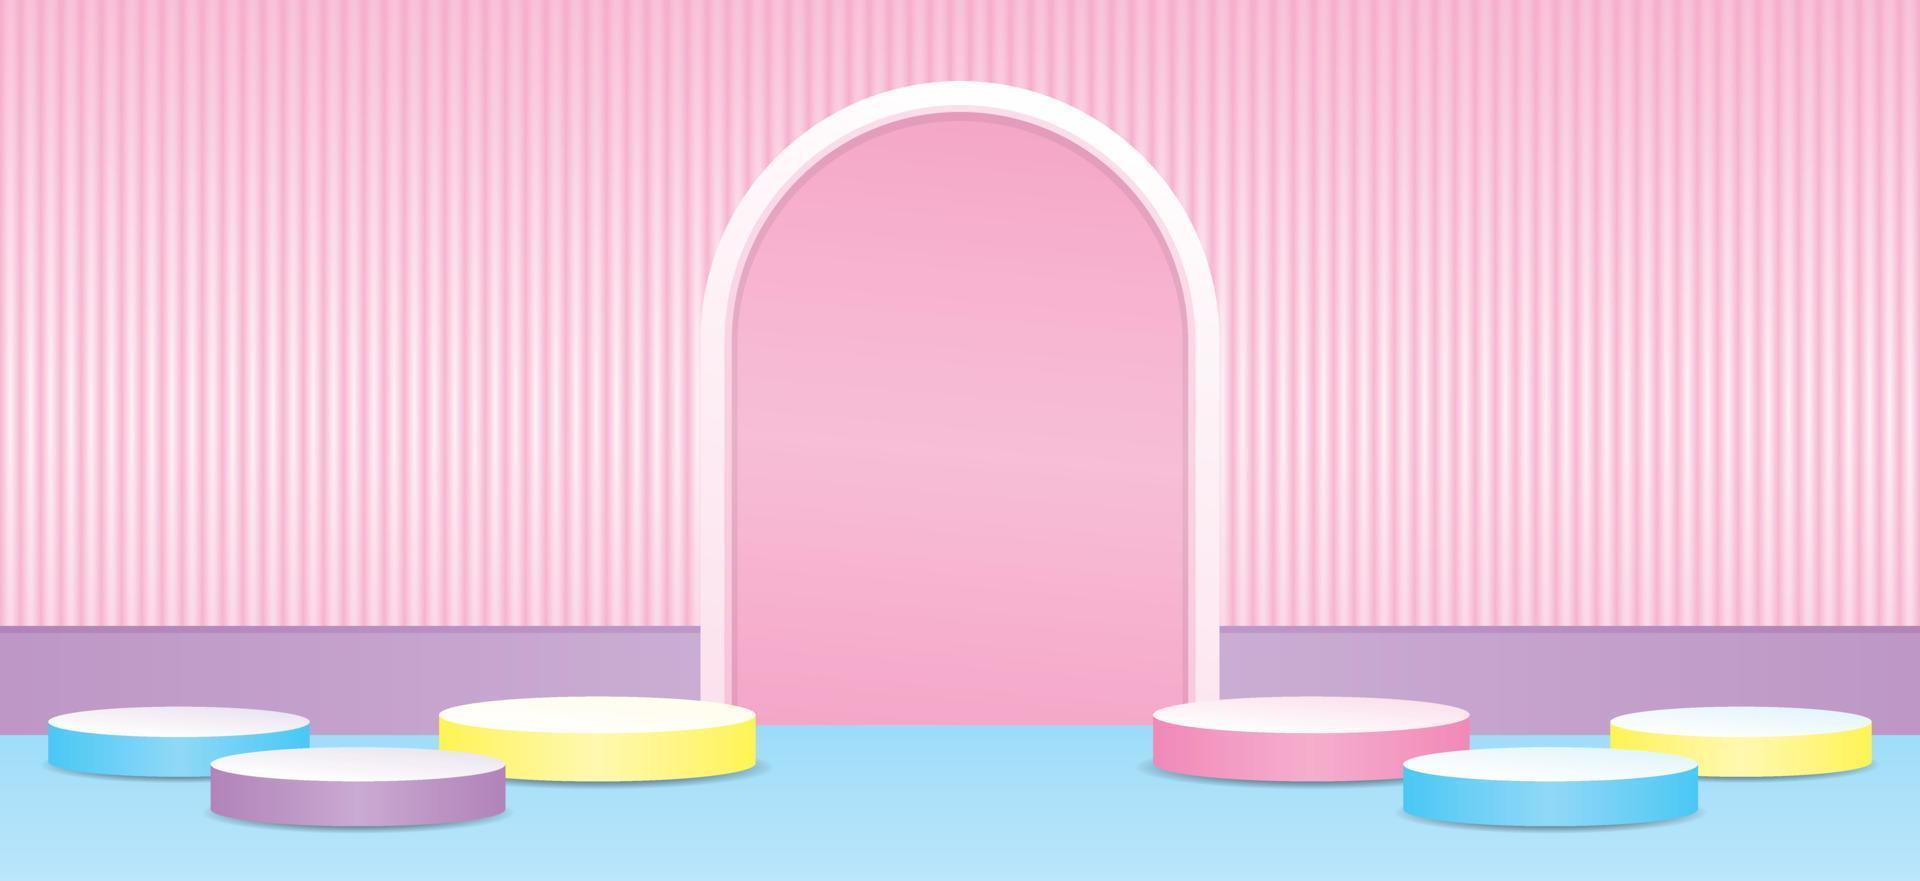 cute girly sweet pastel color podium display with arch backdrop 3d illustration vector for putting your object